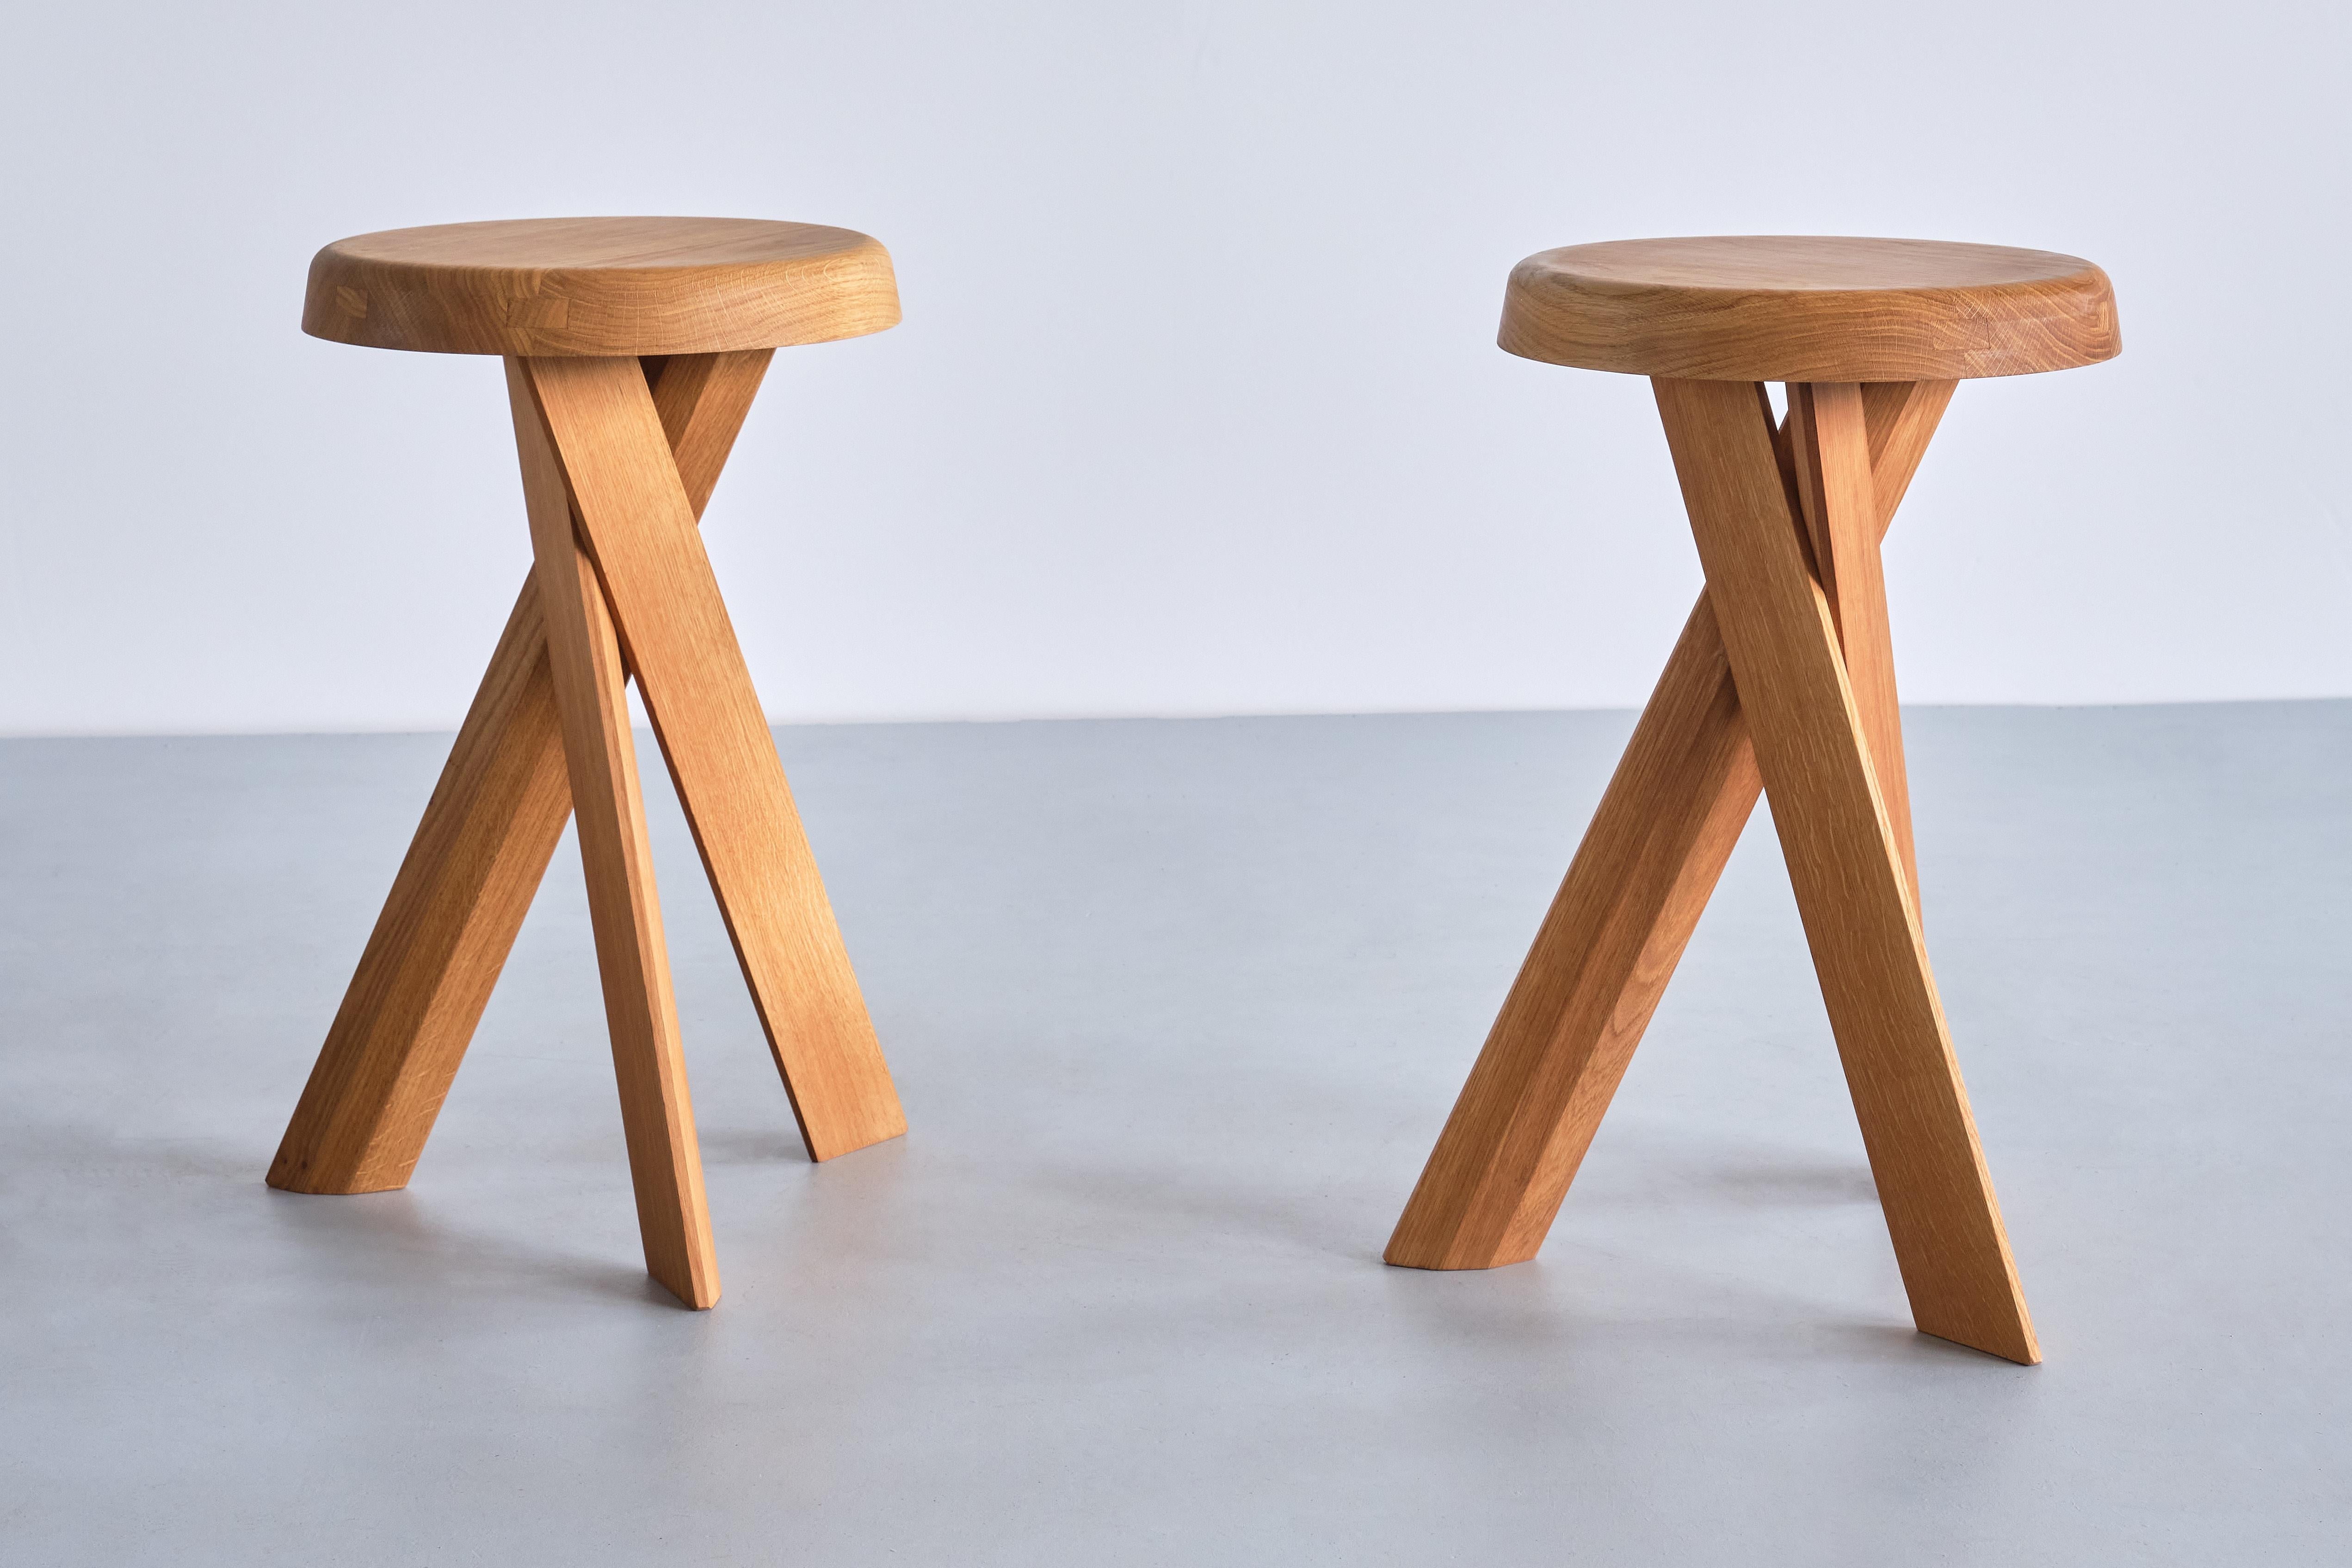 This striking three-legged stool is the model S31-B designed by Pierre Chapo in 1974. The cross legged base and round seat are in solid oak wood. This stool also (could work) works well as a small side table.
  
We have two pieces in stock available